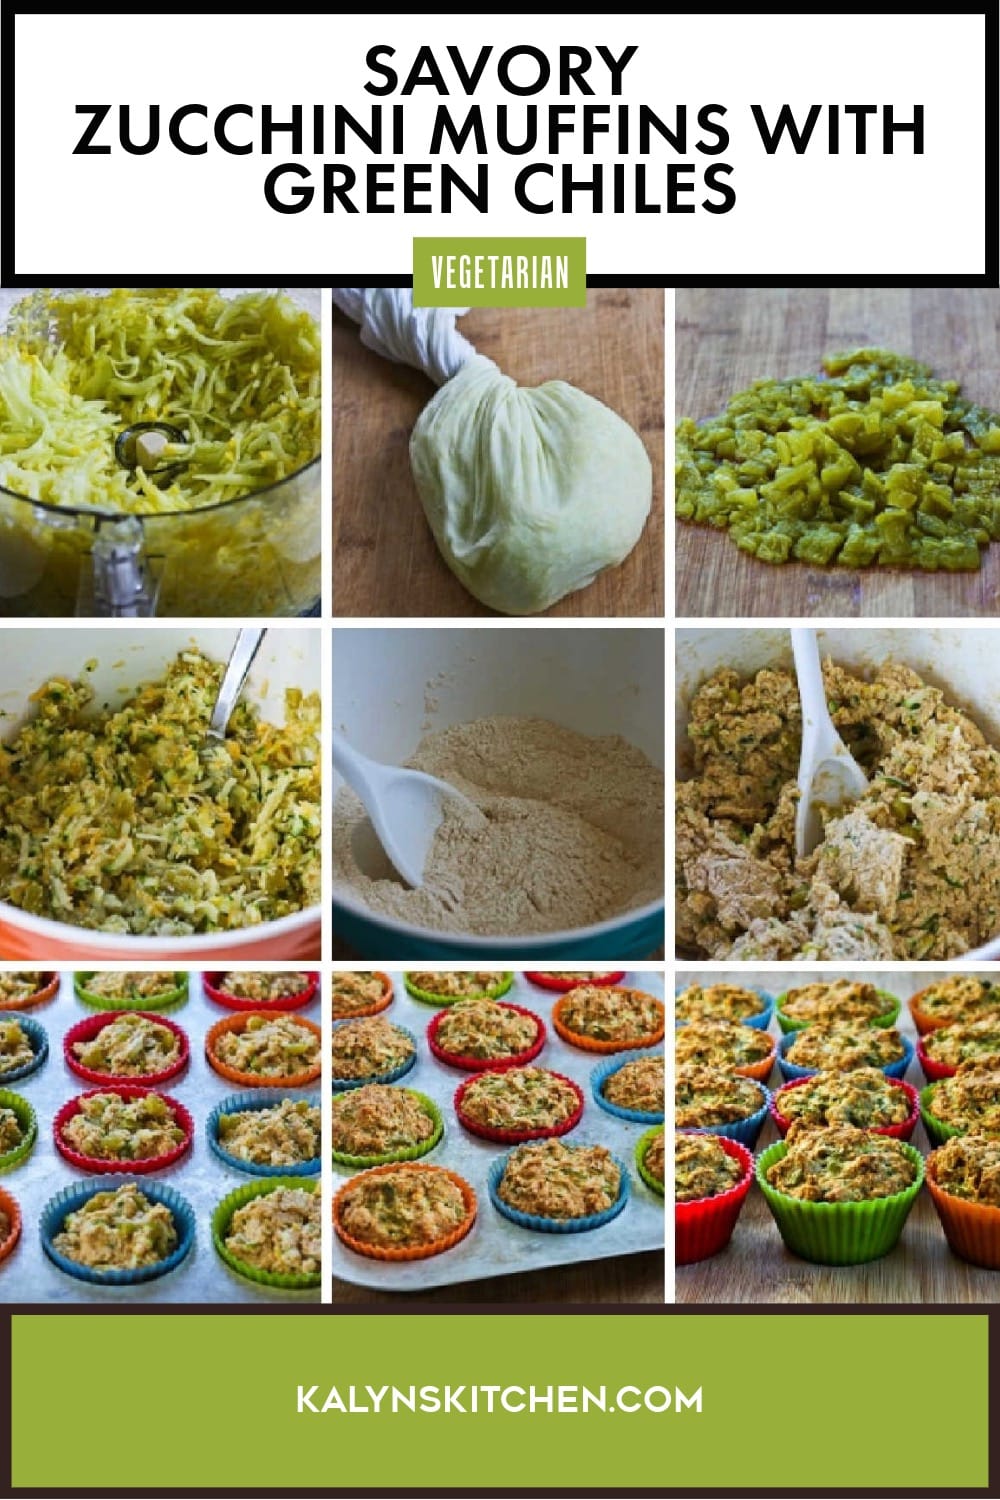 Pinterest image of Savory Zucchini Muffins with Green Chiles